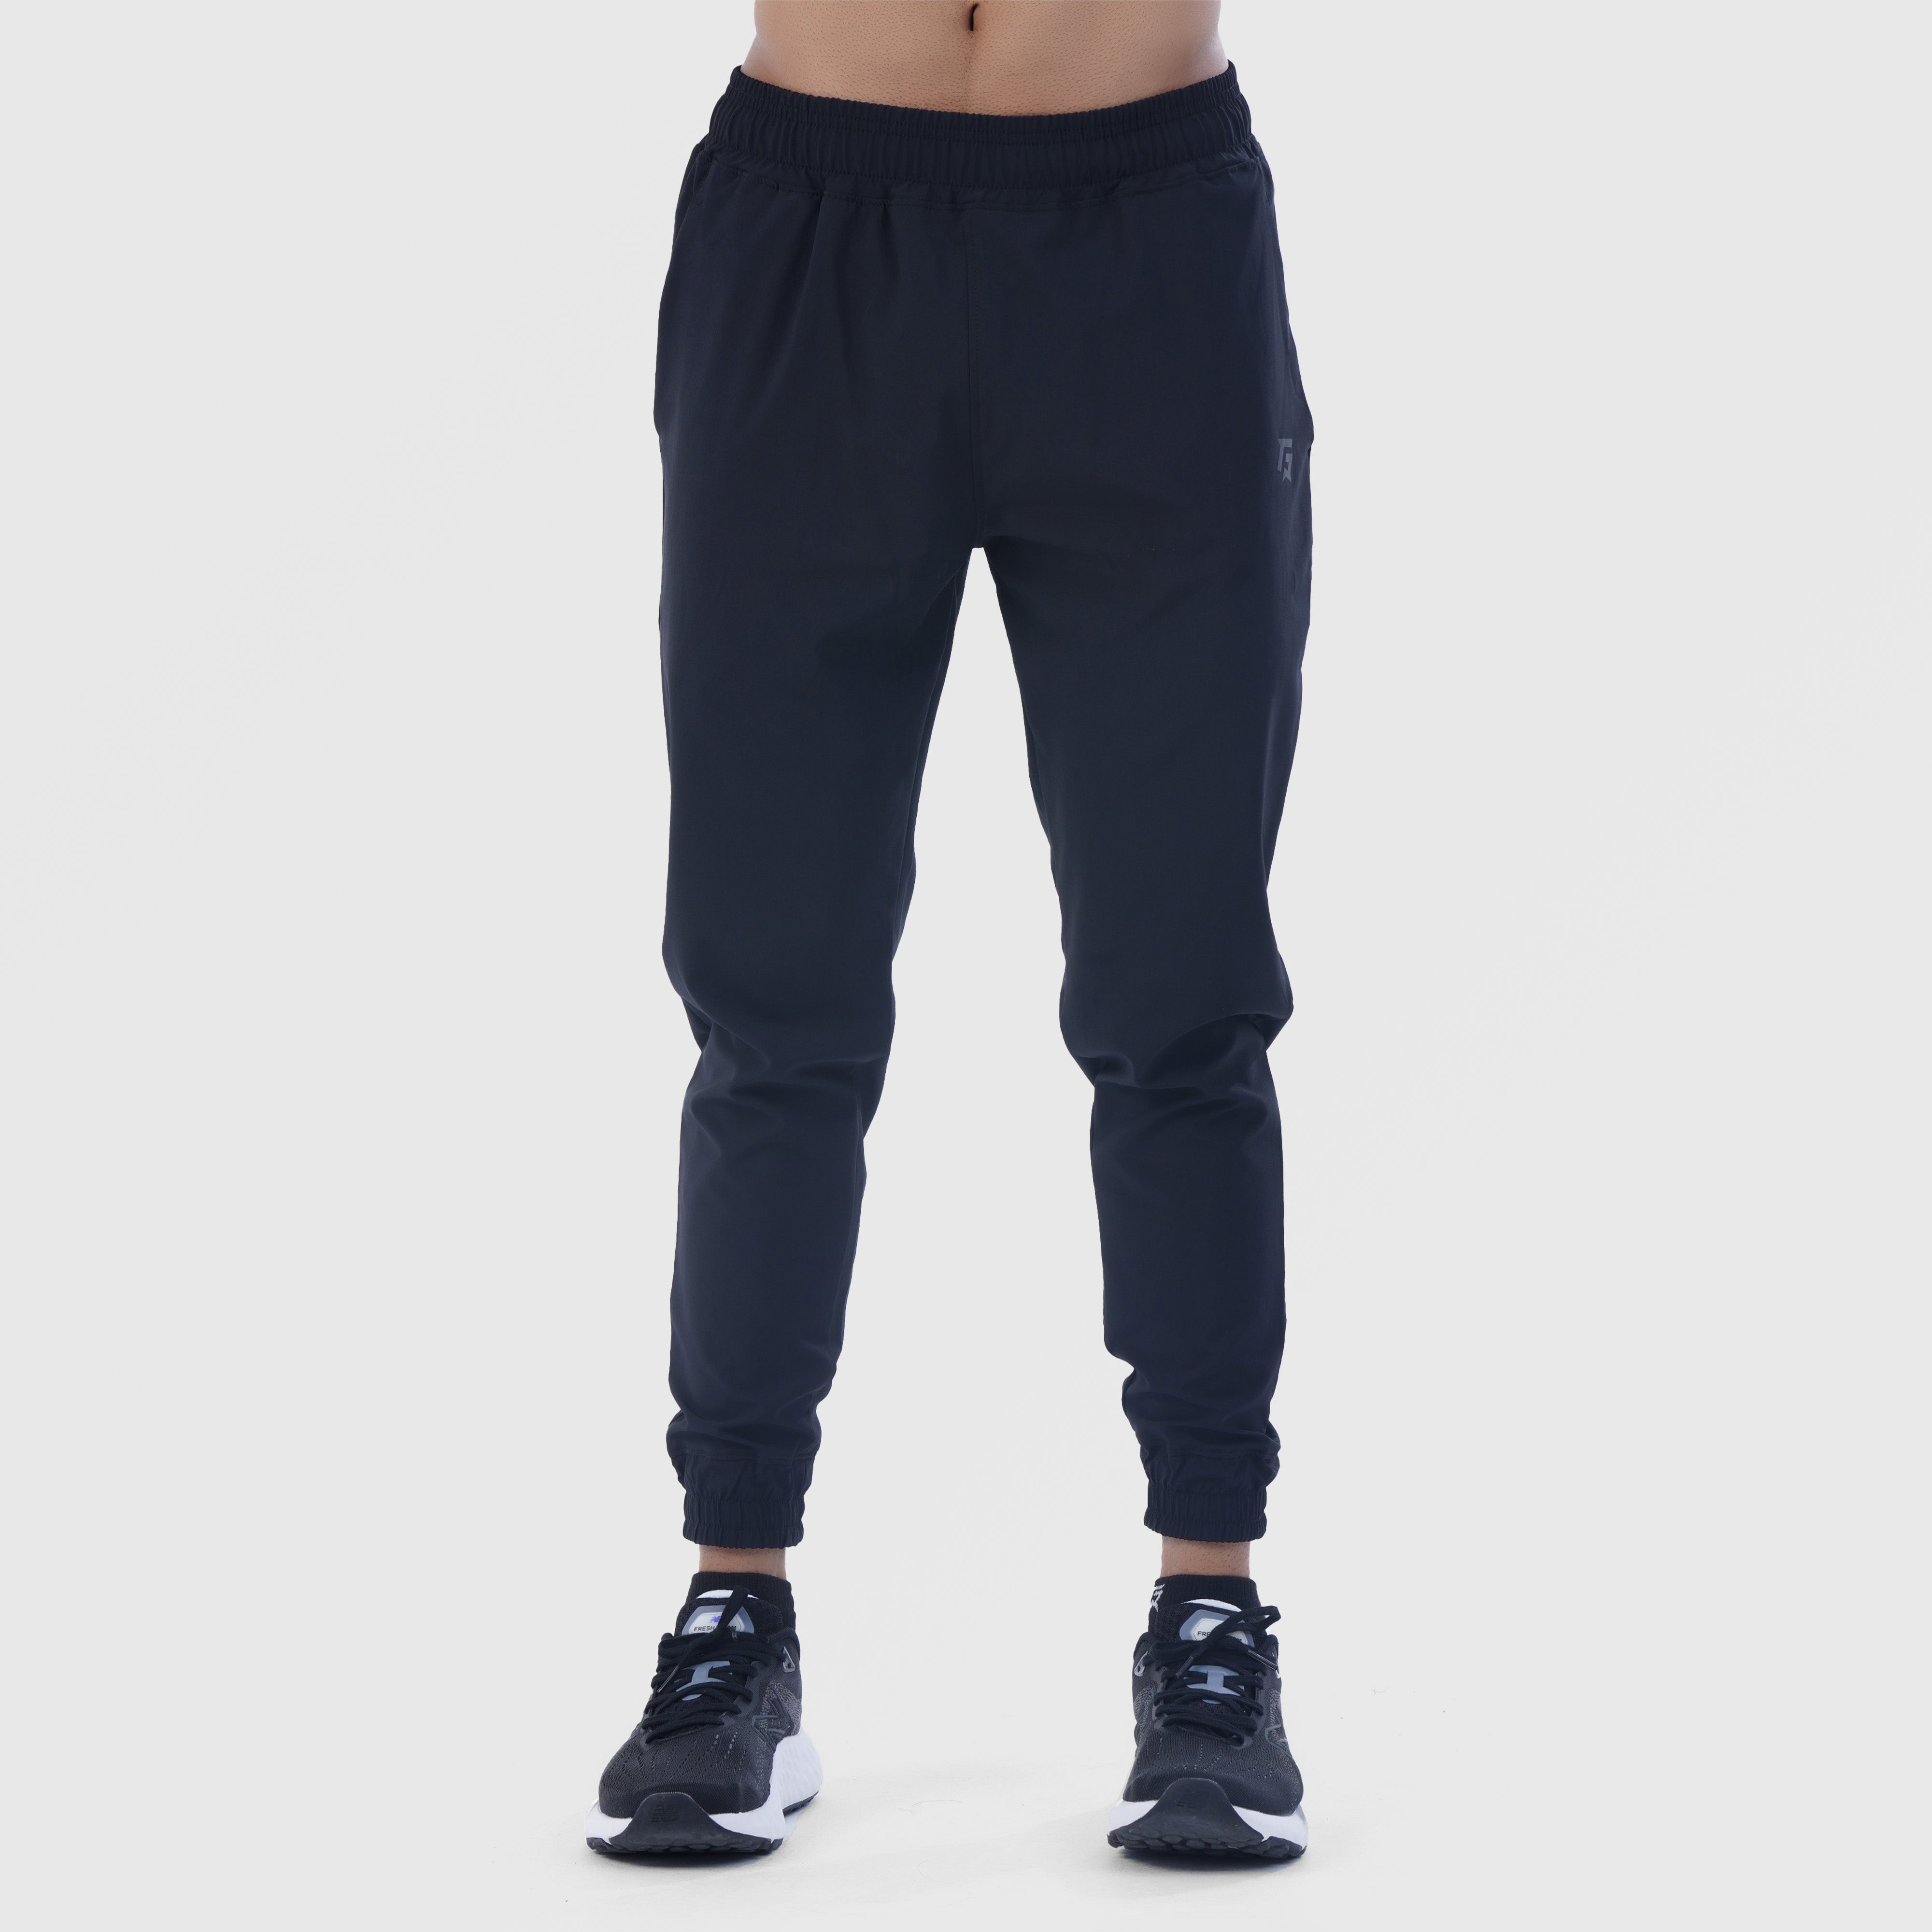 Forge Joggers (Black)